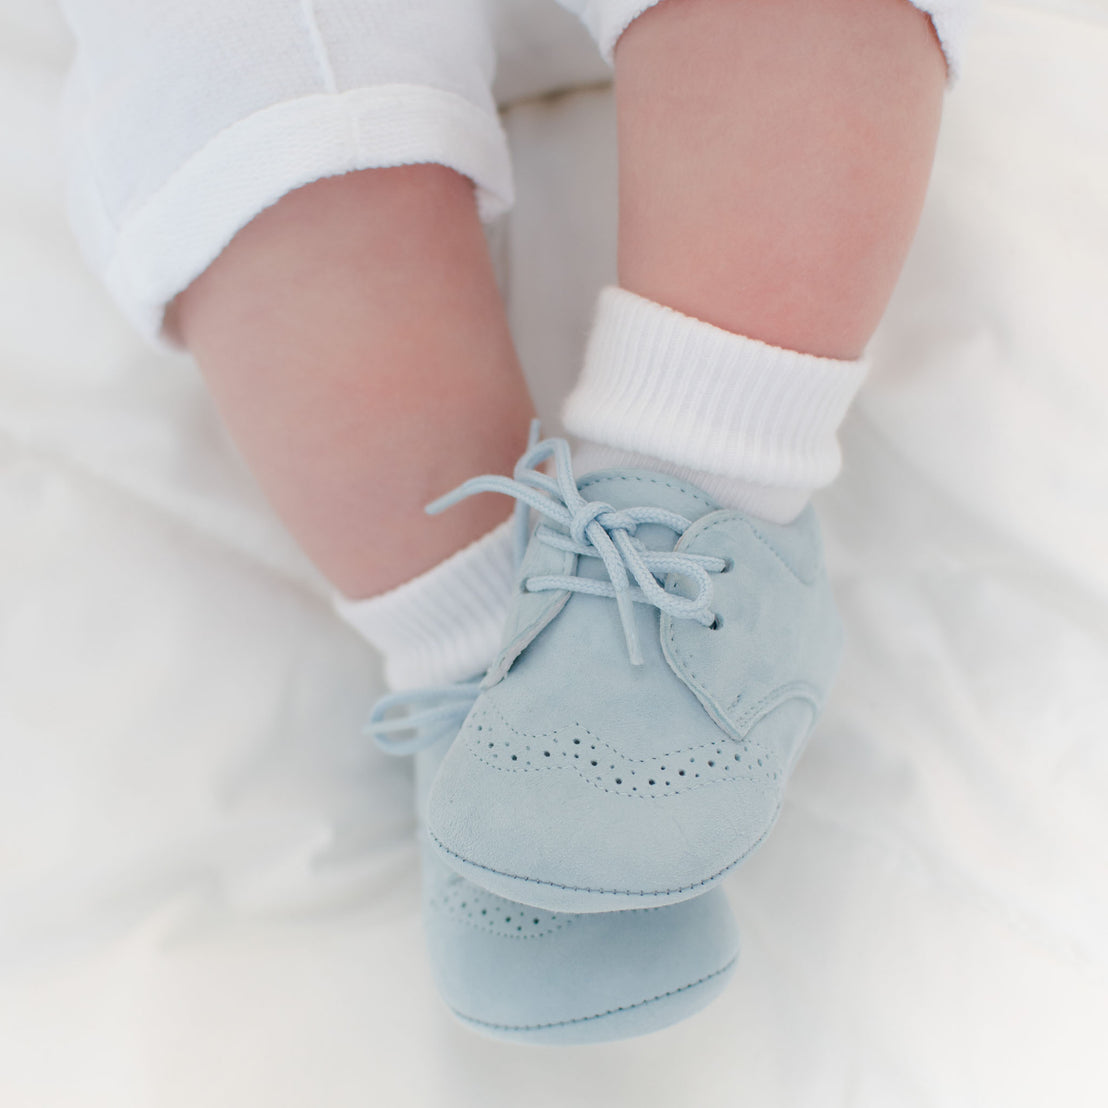 Baby boy wearing the Sky Blue Suede Shoes made from 100% Suede with detailed edging.